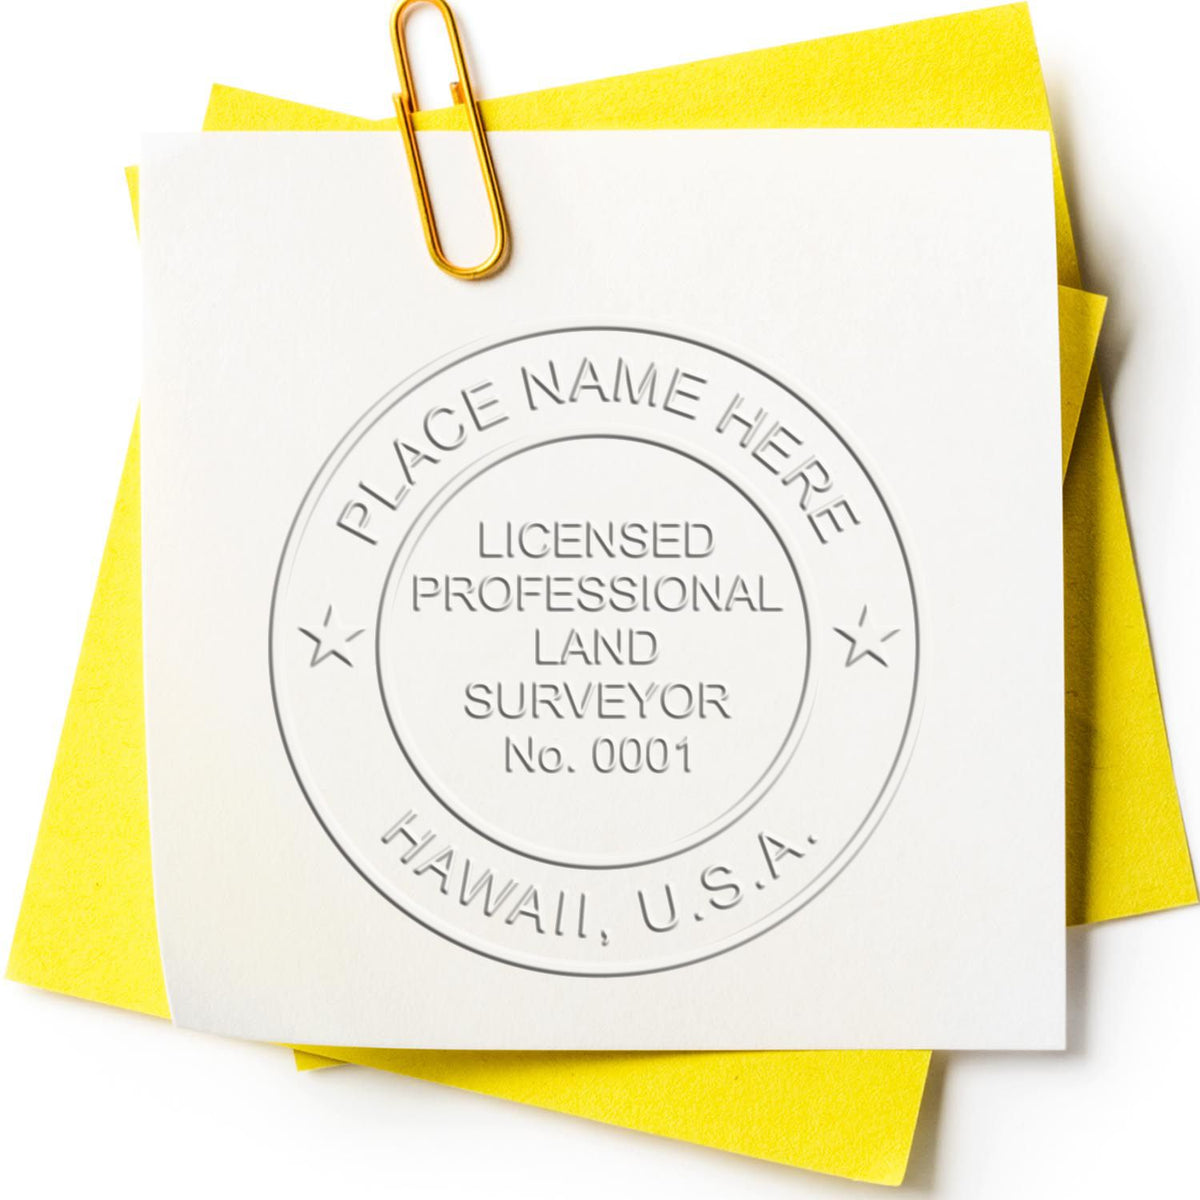 The Long Reach Hawaii Land Surveyor Seal stamp impression comes to life with a crisp, detailed photo on paper - showcasing true professional quality.